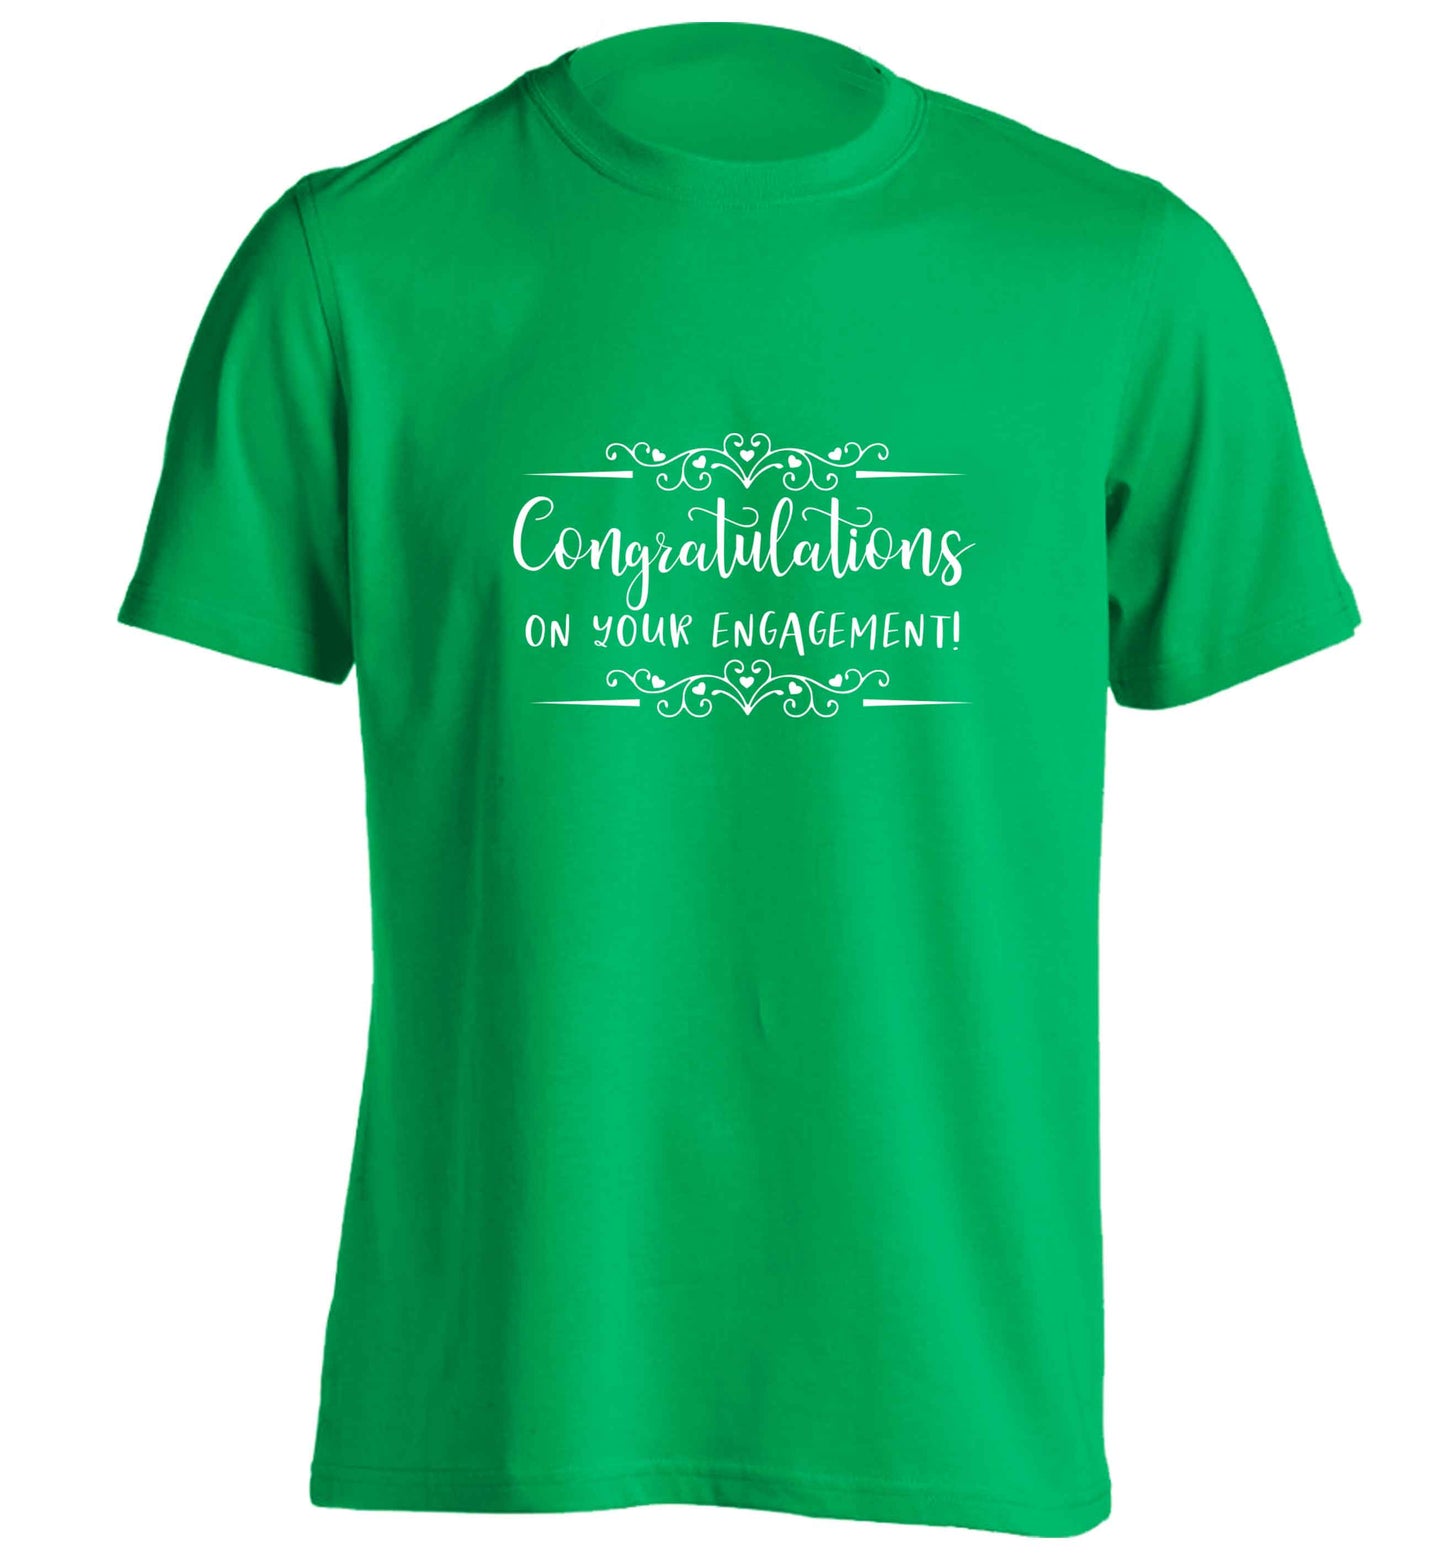 Congratulations on your engagement adults unisex green Tshirt 2XL